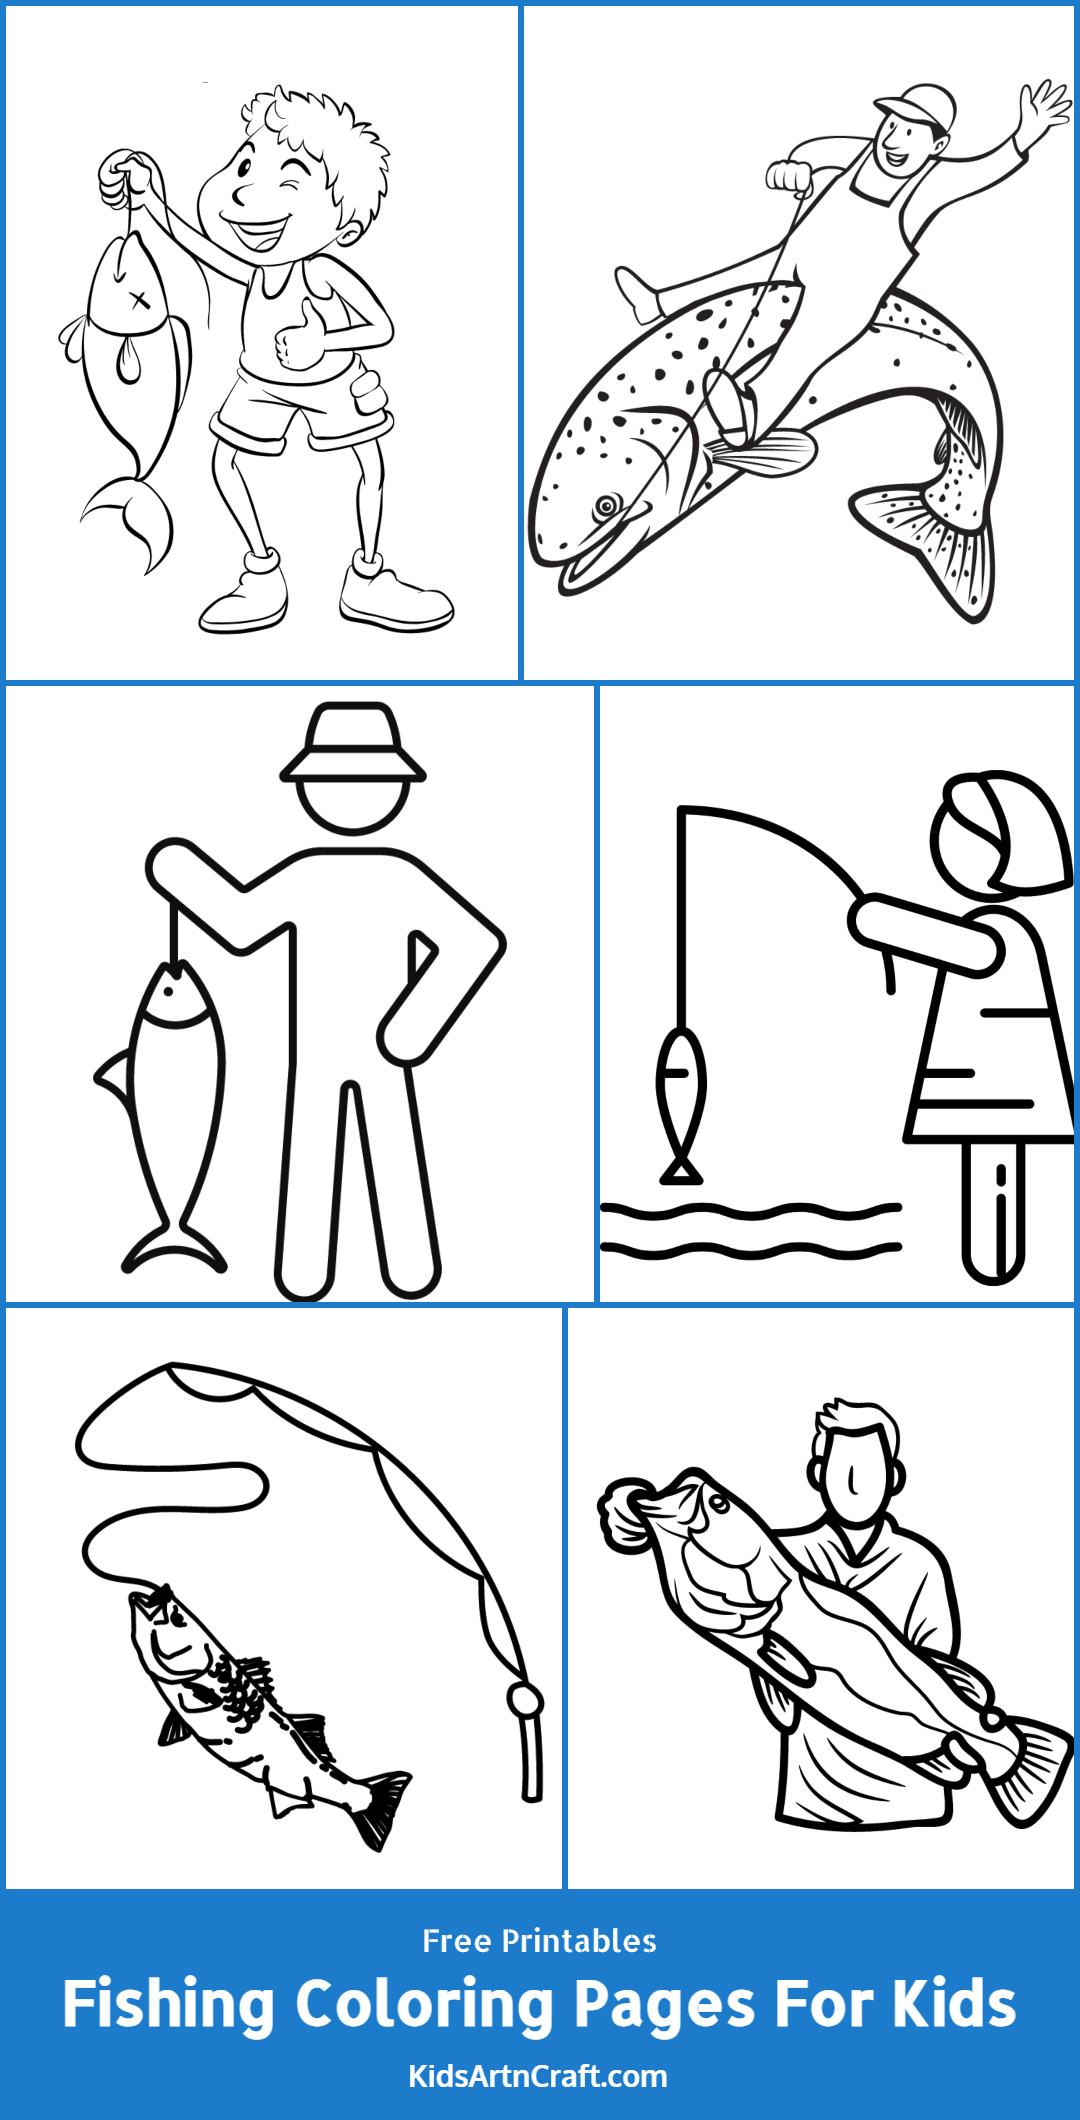 Fishing Coloring Pages For Kids – Free Printables